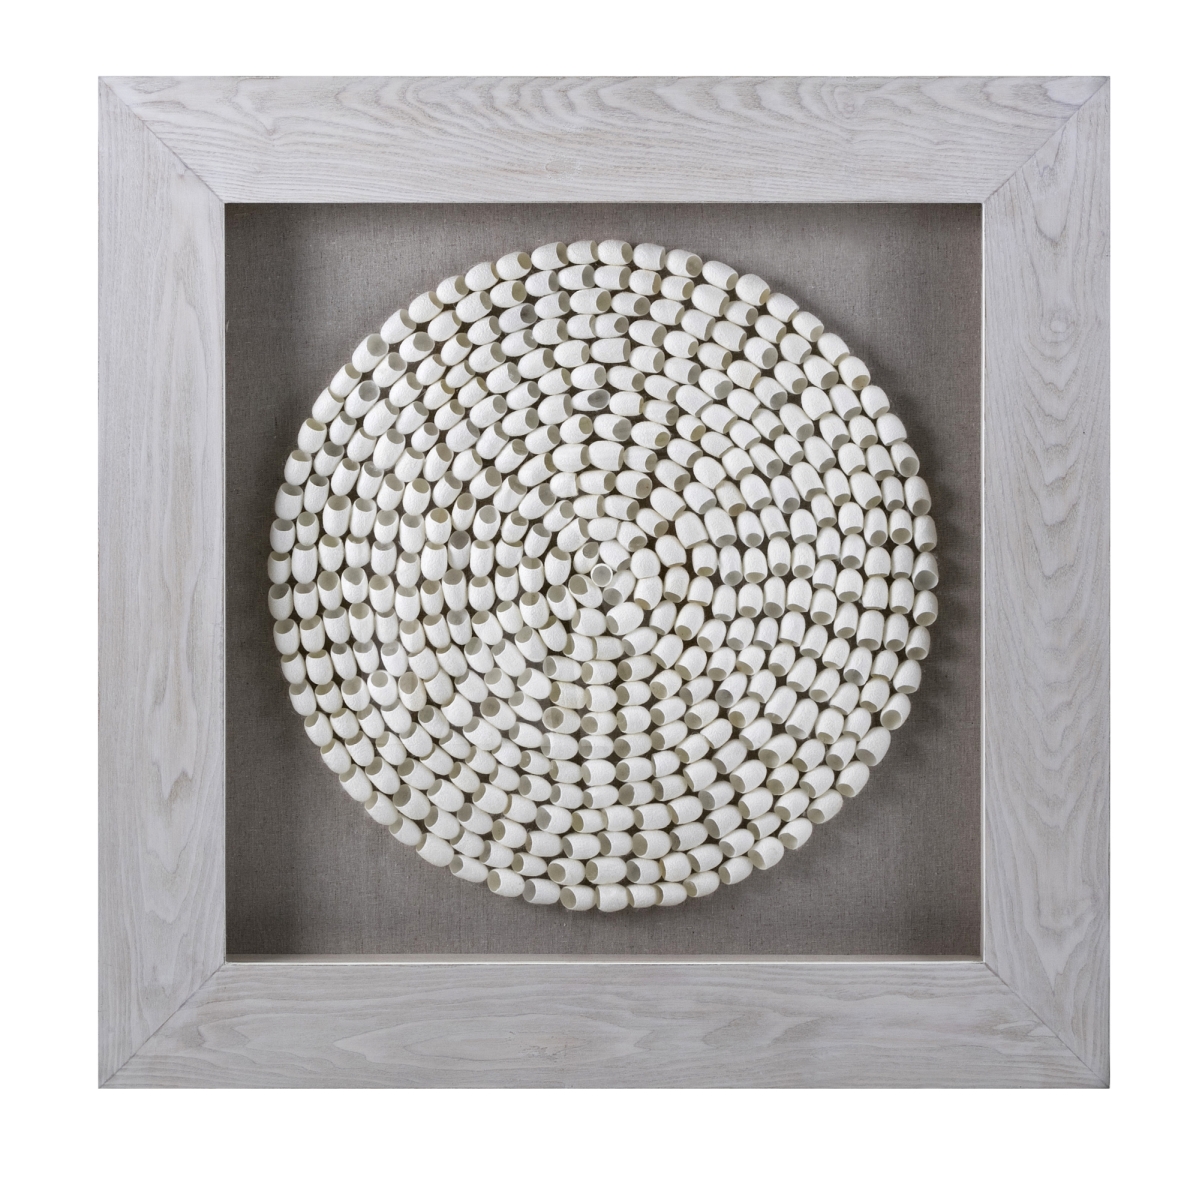 Imax 75054 Cocoon Art In Shadowbox, White